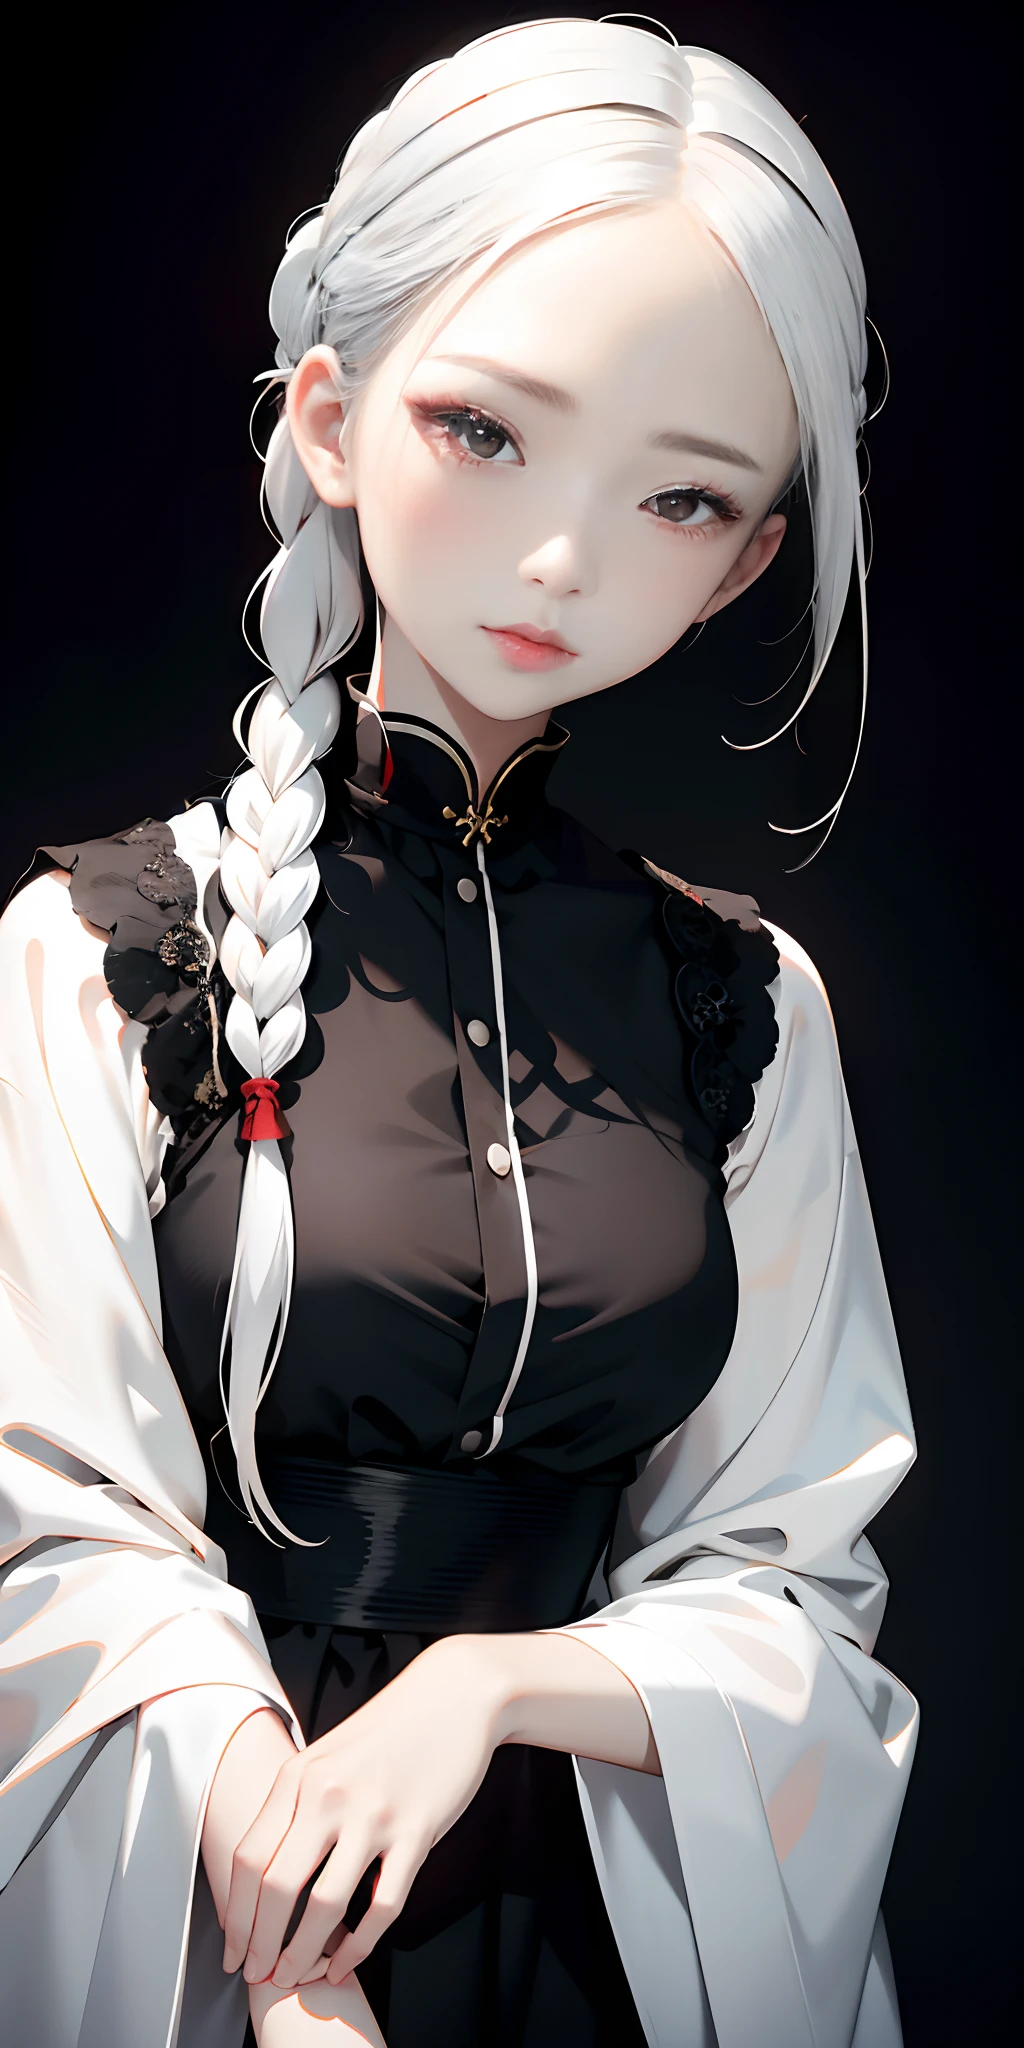 top-quality、​masterpiece、1 girl in、black backgrounds、white  hair:1.5、Red Eyes、red-lips、white  clothes、Black and white world、Black and white world、light skinned、Side braid